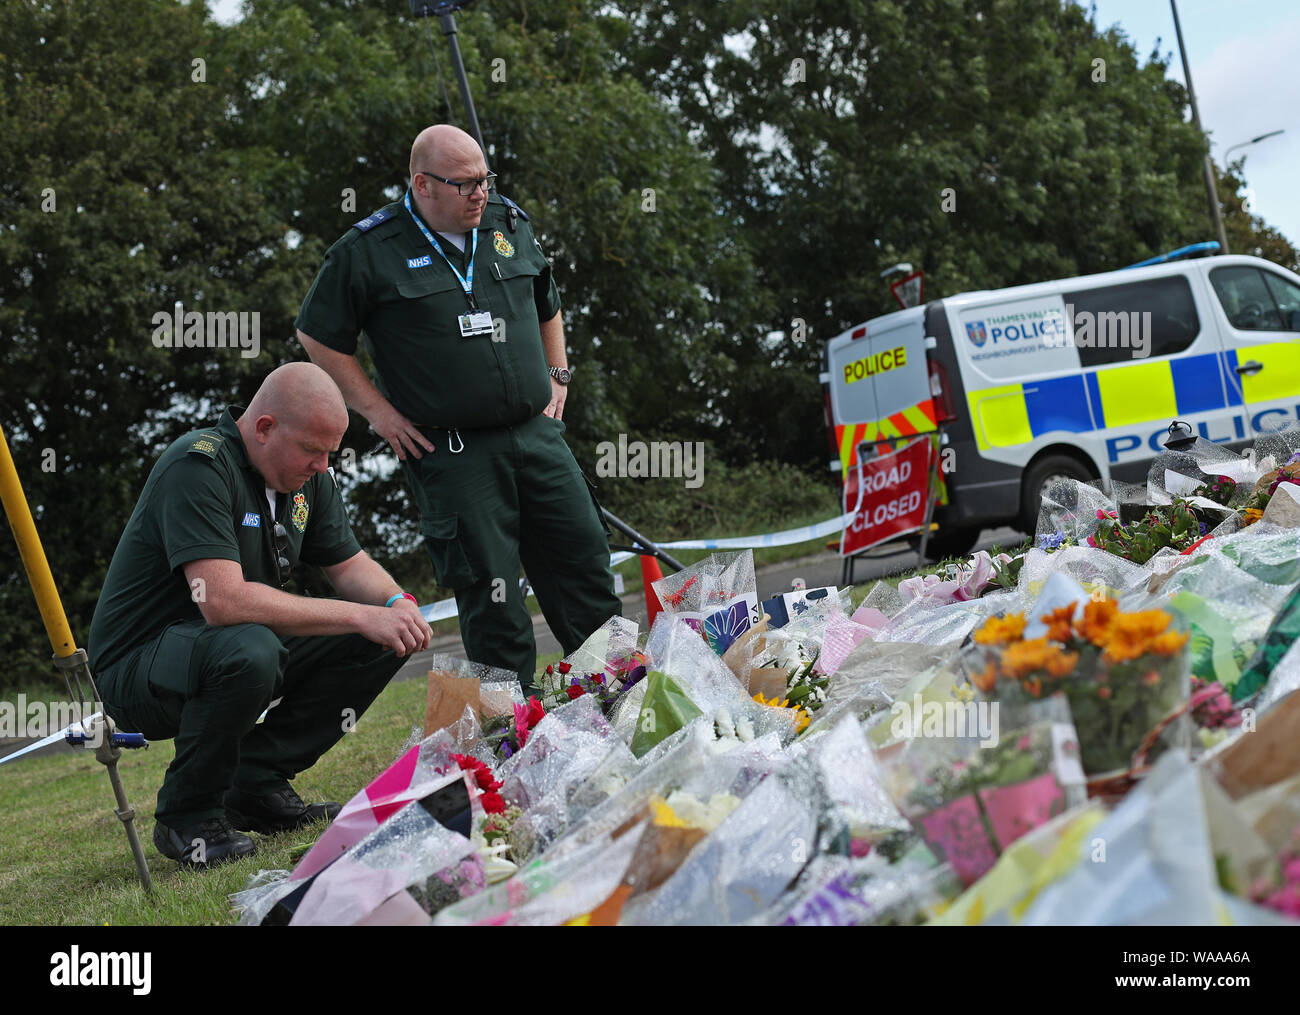 Ambulance paramedics pay their respects in front of tributes left at the scene near Ufton Lane, Sulhamstead, Berkshire, where Thames Valley Police officer Pc Andrew Harper, 28, died following a 'serious incident' at about 11.30pm on Thursday near the A4 Bath Road, between Reading and Newbury, at the village of Sulhamstead in Berkshire. Stock Photo